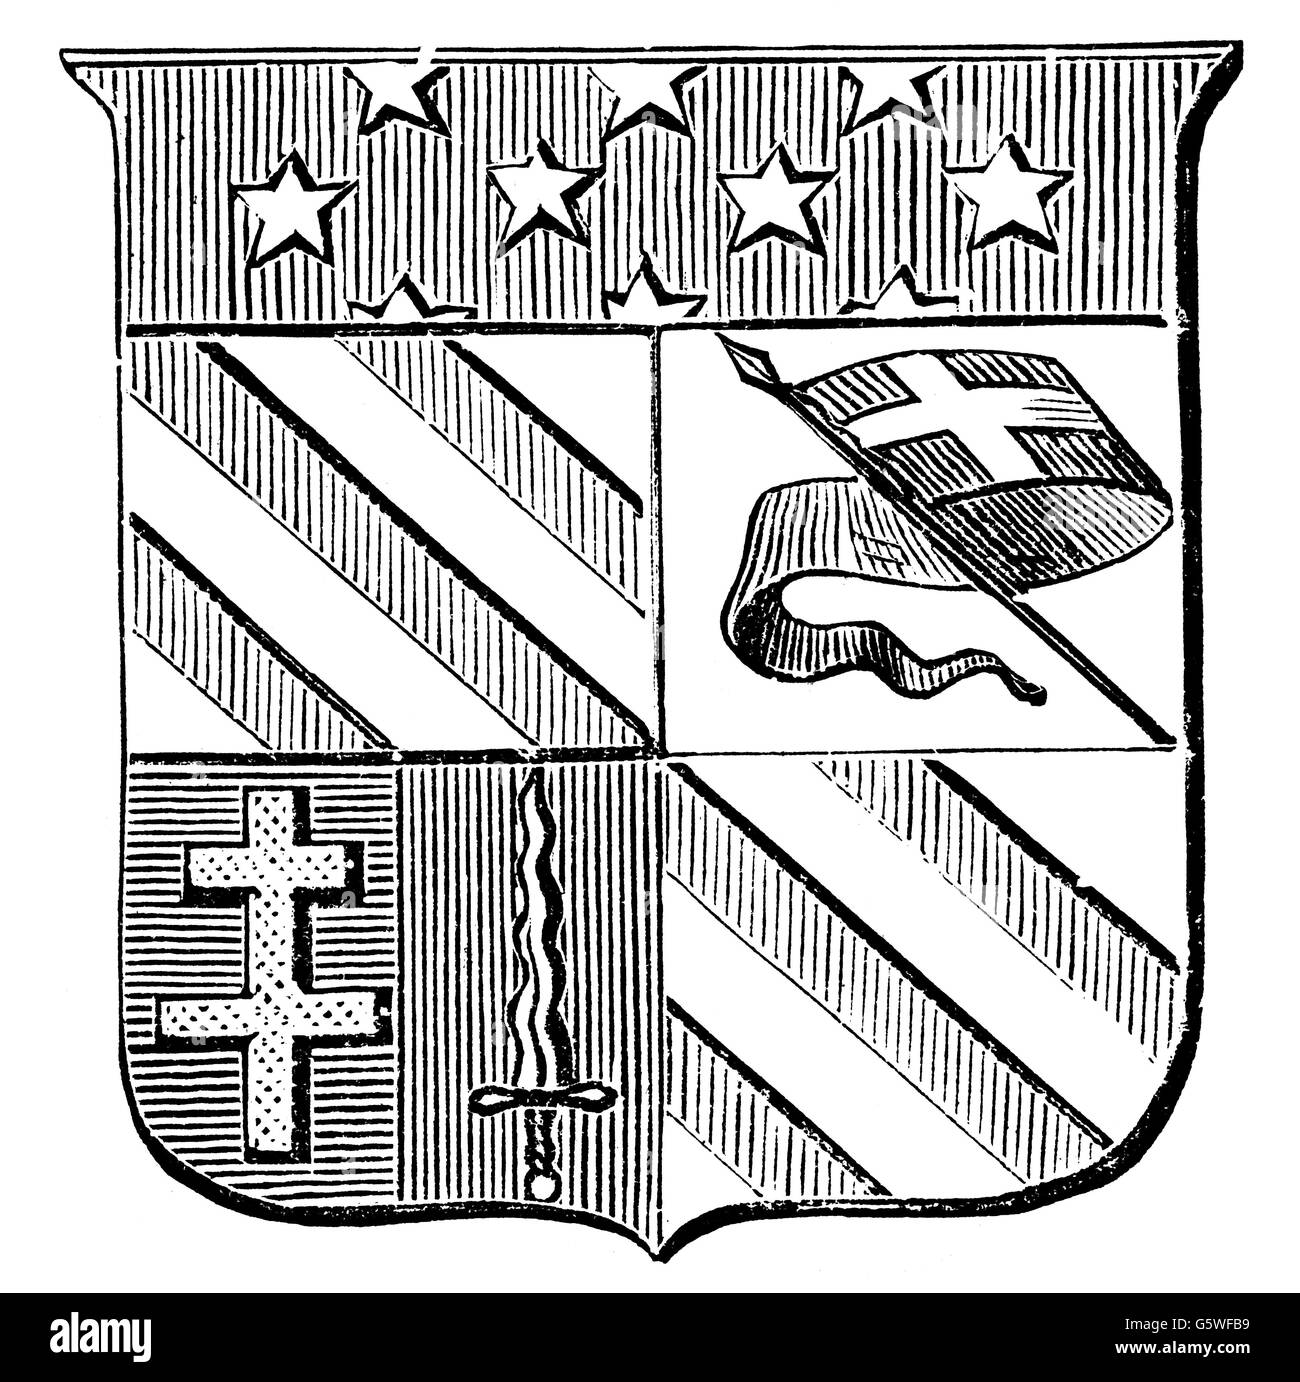 heraldry, coat of arms, individual coat of arms, coat of arms of Marshal Auguste Viesse de Marmont, Duke of Ragusa, awarded 1809, wood engraving, 1885, France, general, generals, military, bonapartist nobility, first empire, 19th century, historic, historical, Additional-Rights-Clearences-Not Available Stock Photo